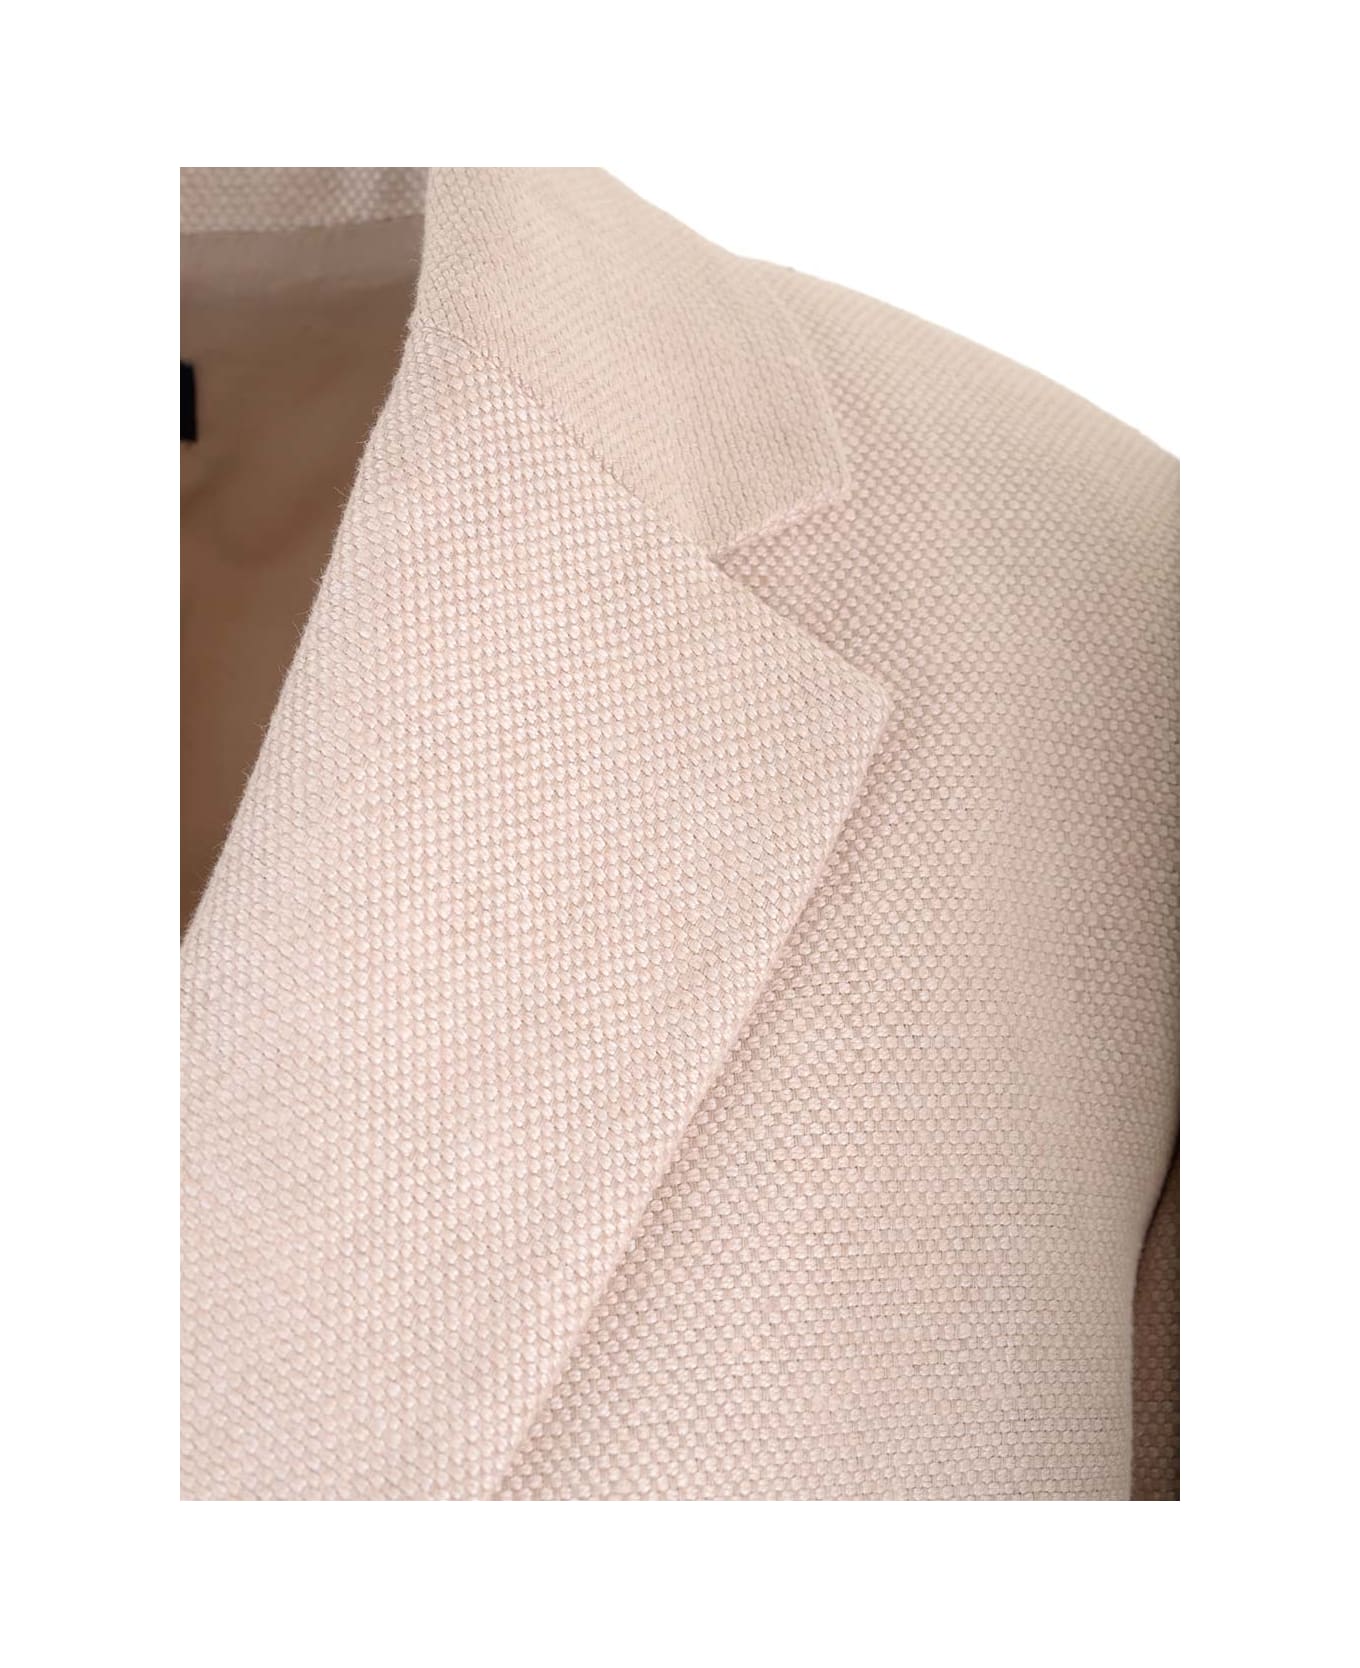 Theory Double-breasted Blazer In Linen Twill - NEUTRALS